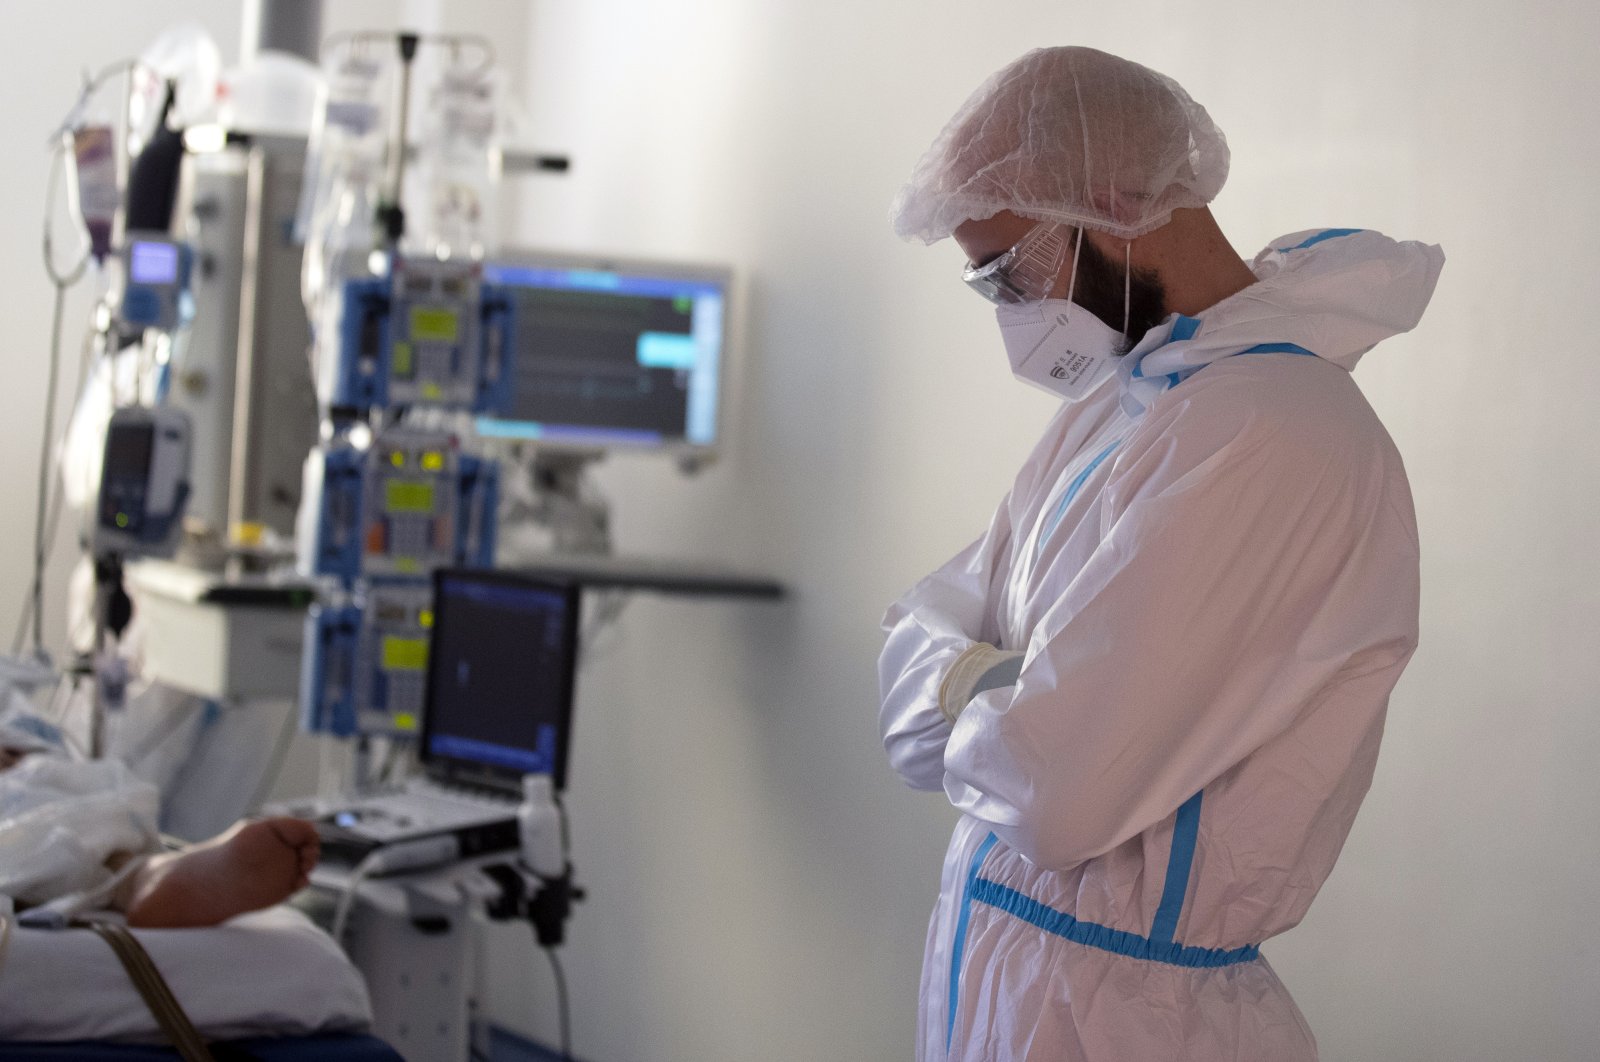 A healthcare worker looks down while they assist a COVID-19 patient at one of the intensive care units (ICU) of the Ramon y Cajal hospital in Madrid, Spain, Spain, Friday, April 24, 2020. (AP Photo)